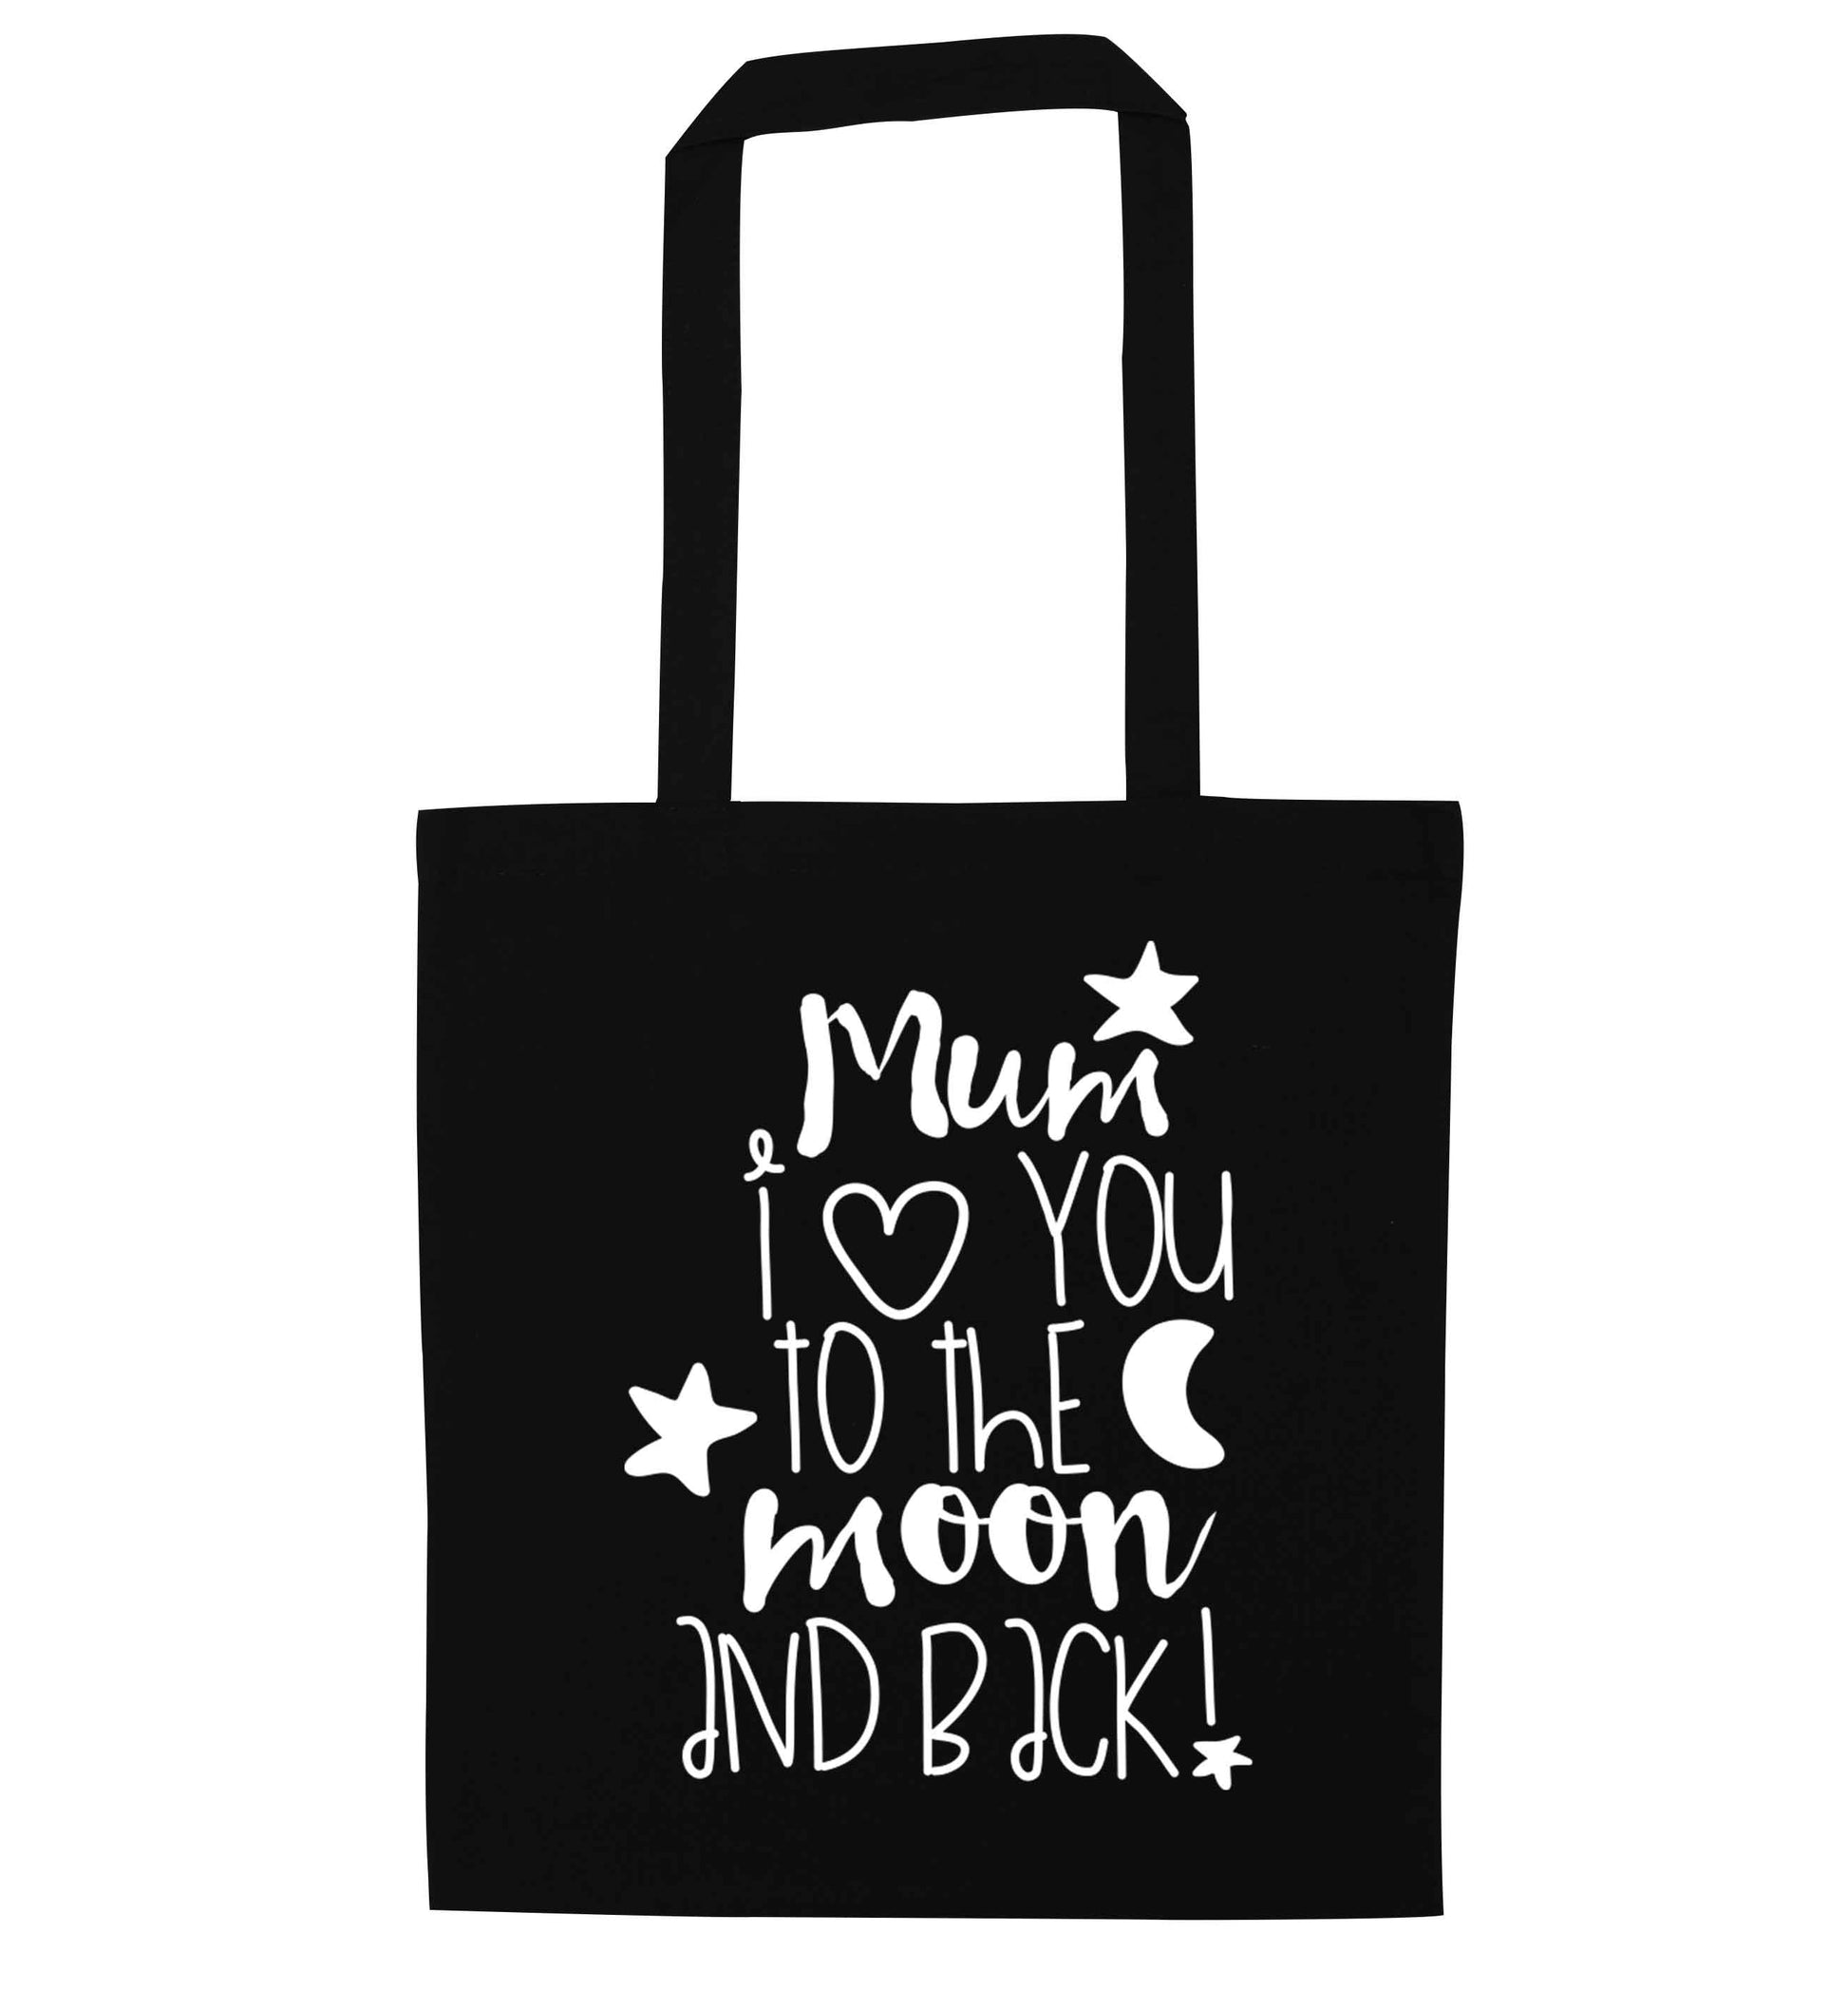 Mum I love you to the moon and back black tote bag